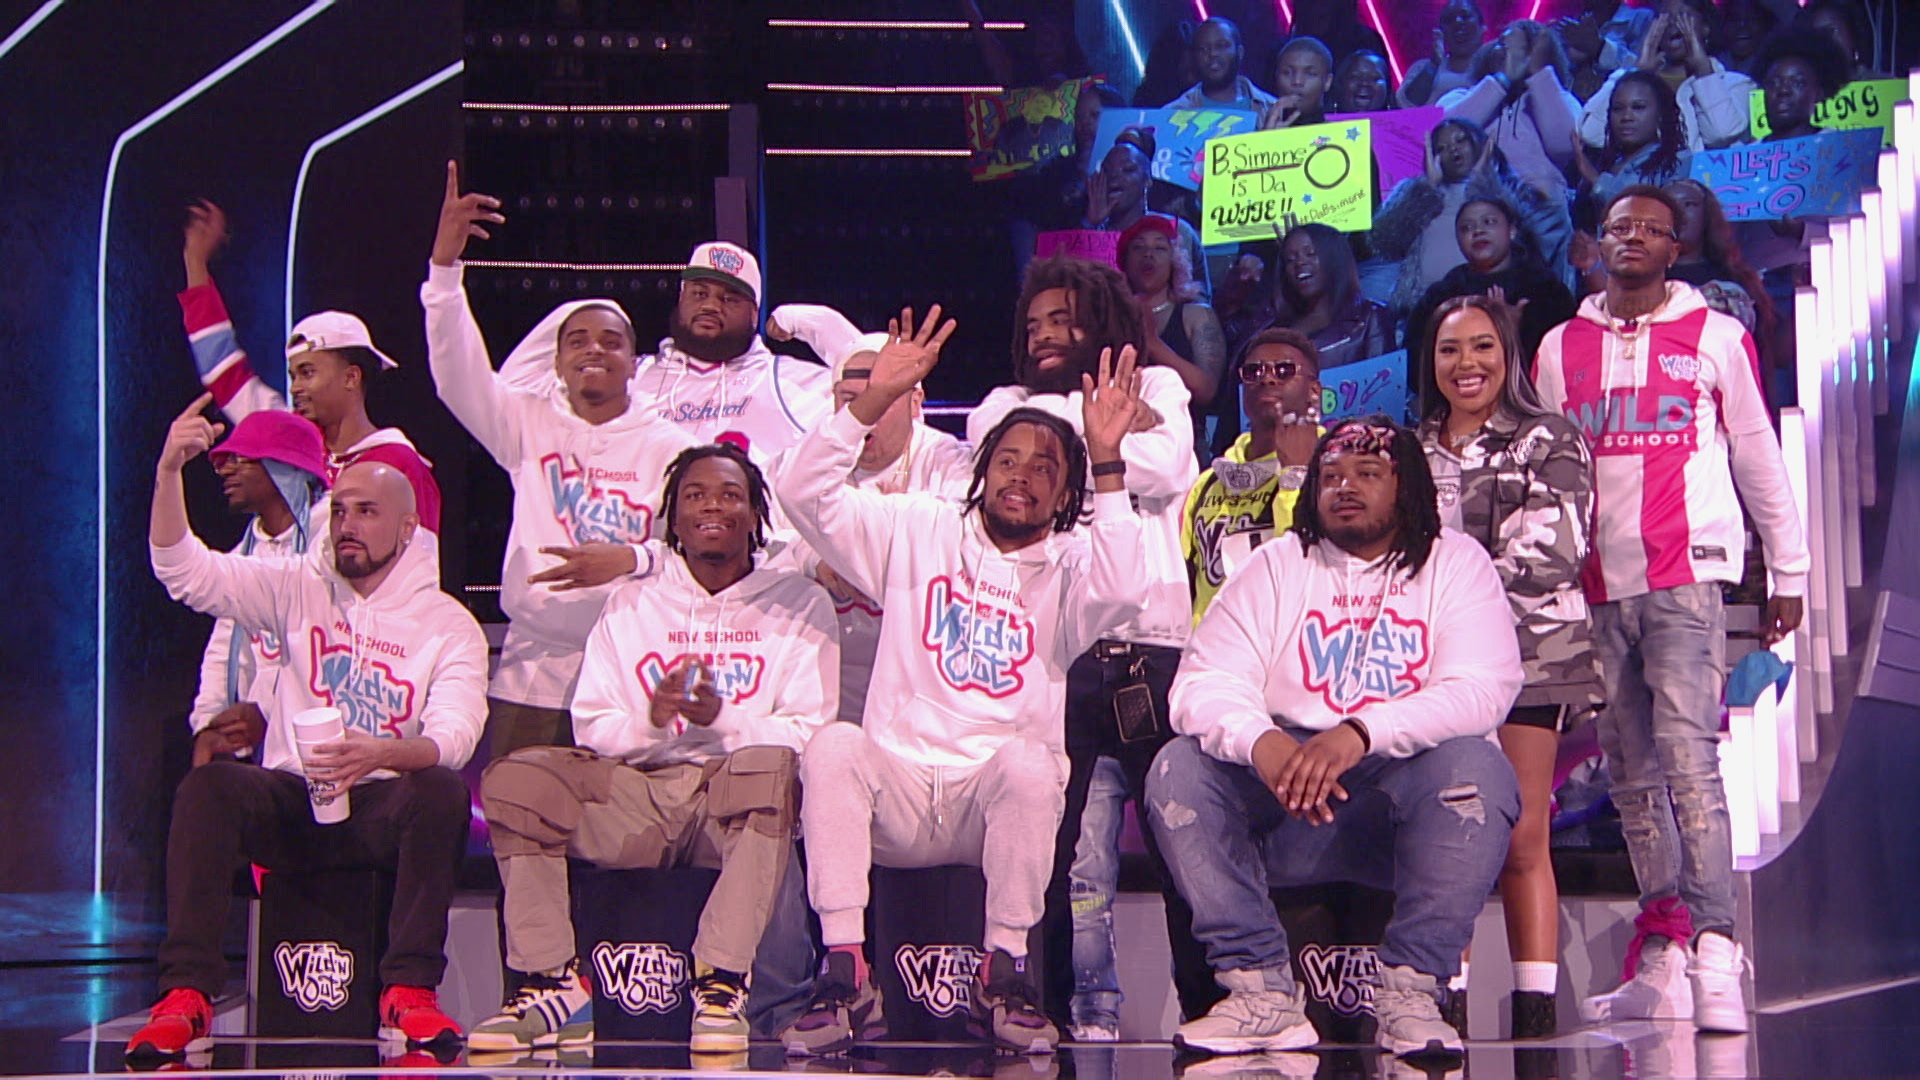 Watch Nick Cannon Presents Wild 'N Out Season 15 Episode 16 Naughty By Nature / Pivot Gang